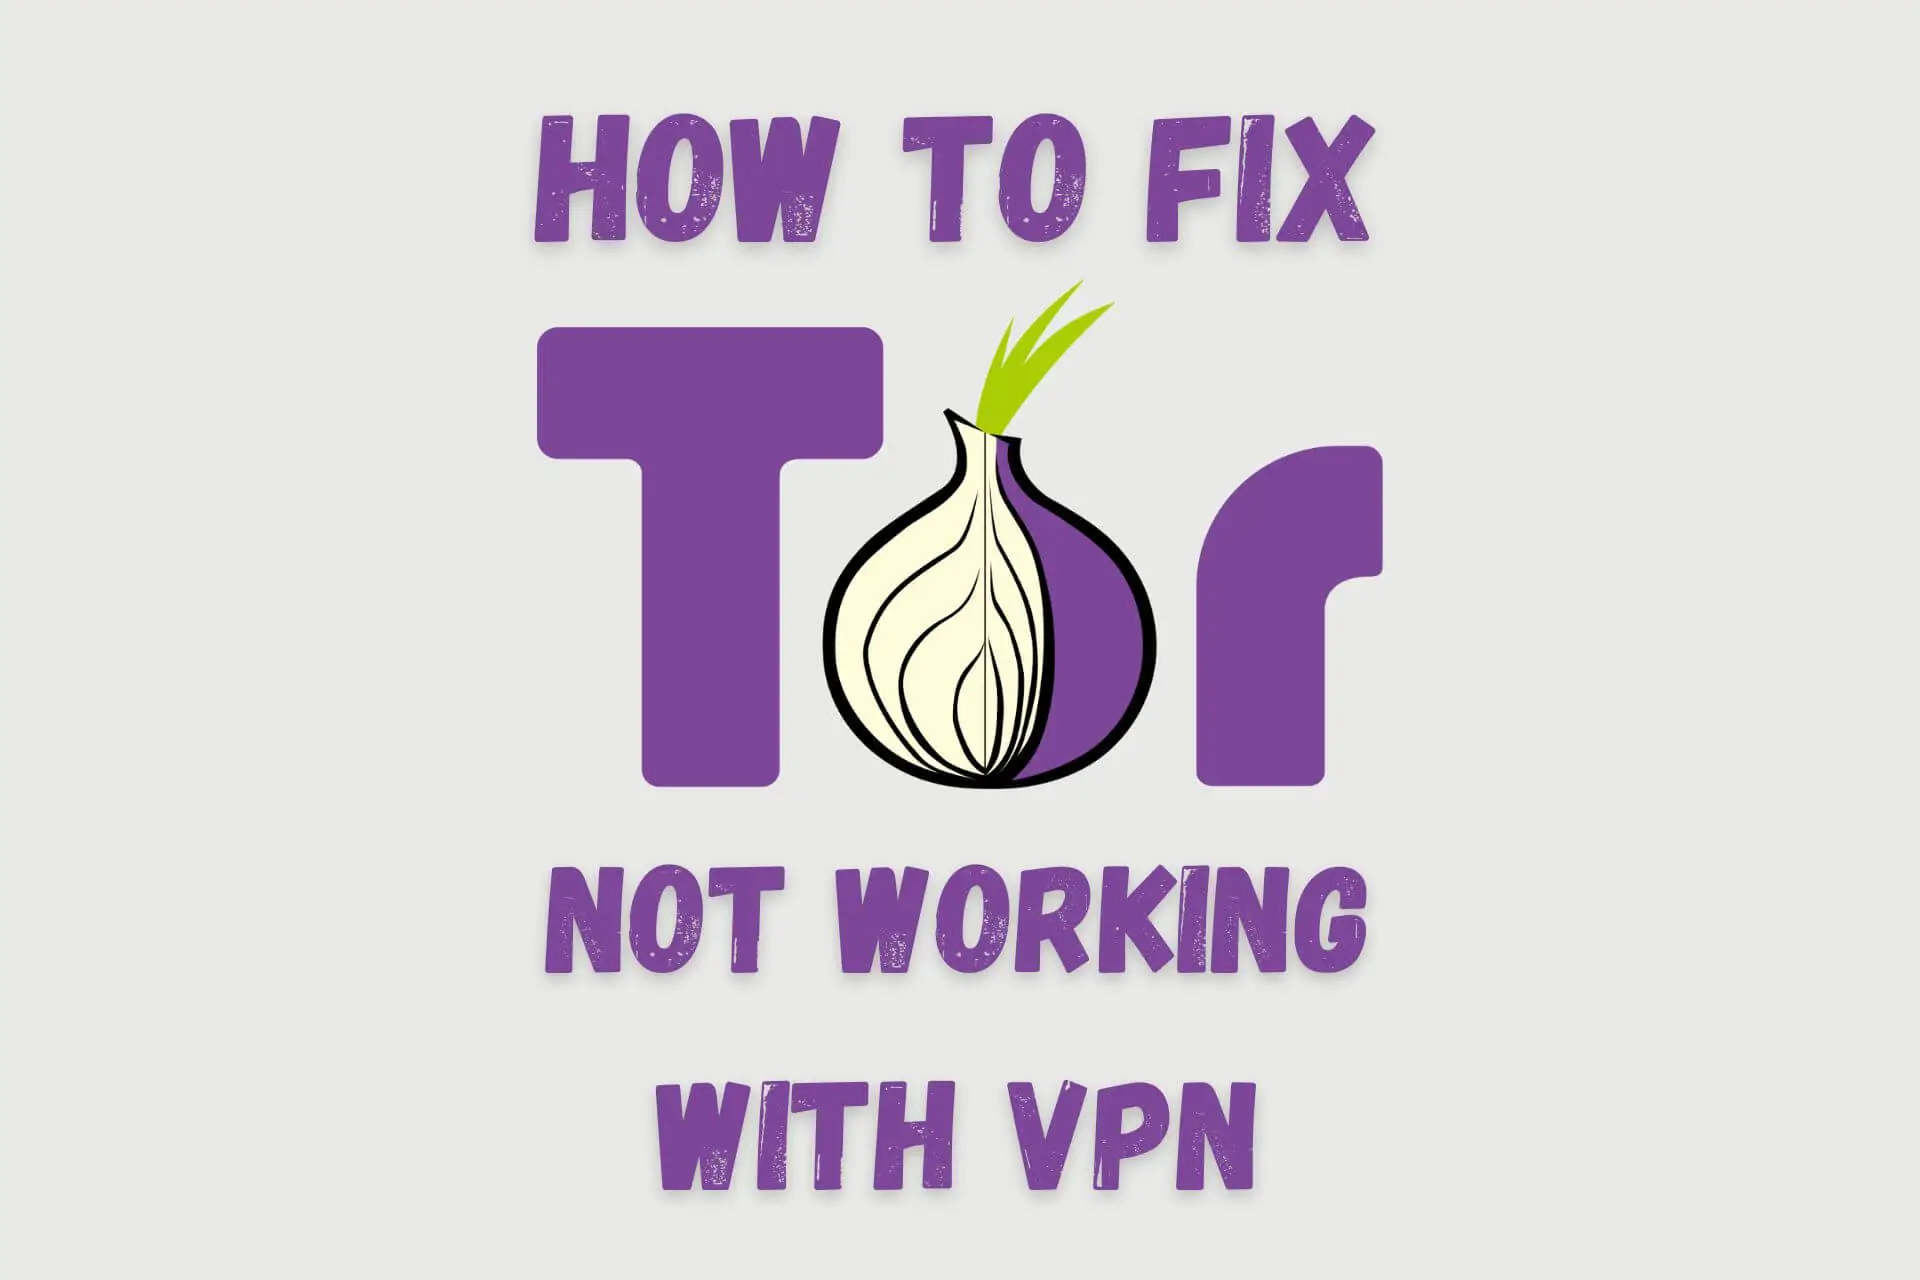 tor not working with vpn